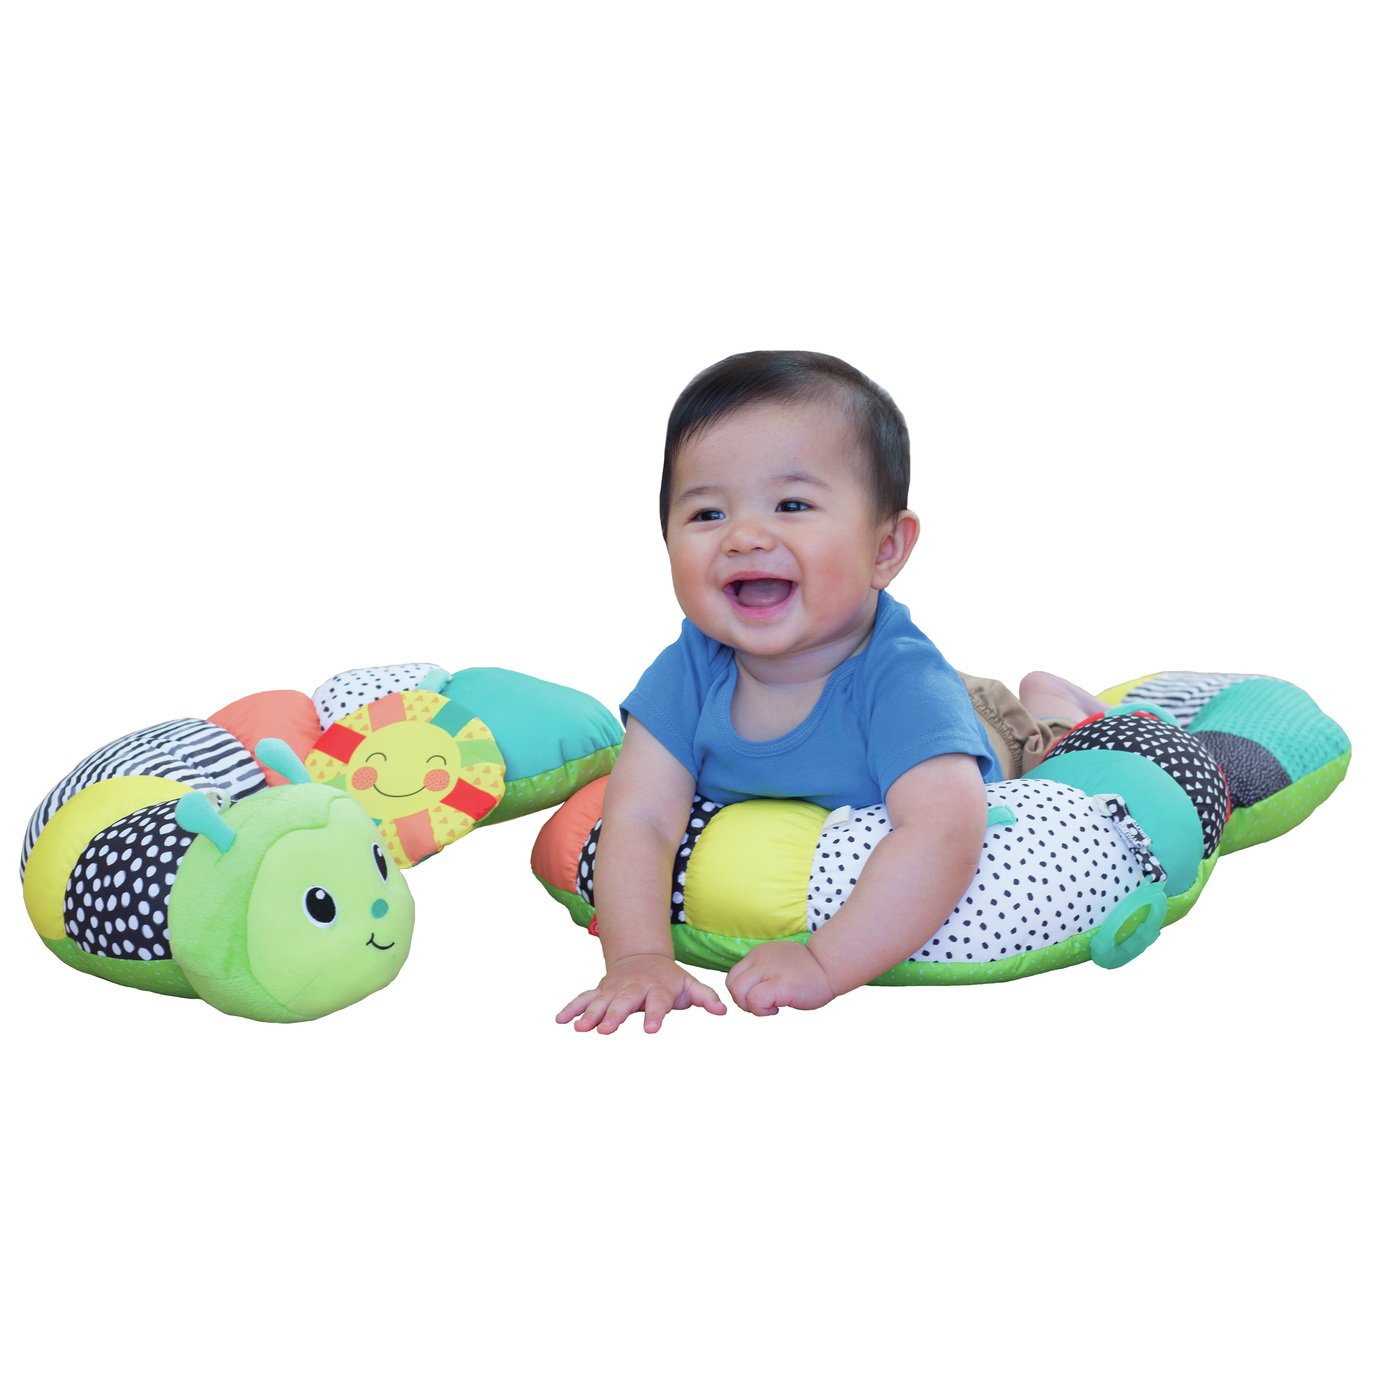 Infantino Tummy Time & Seated Support Playmat Review